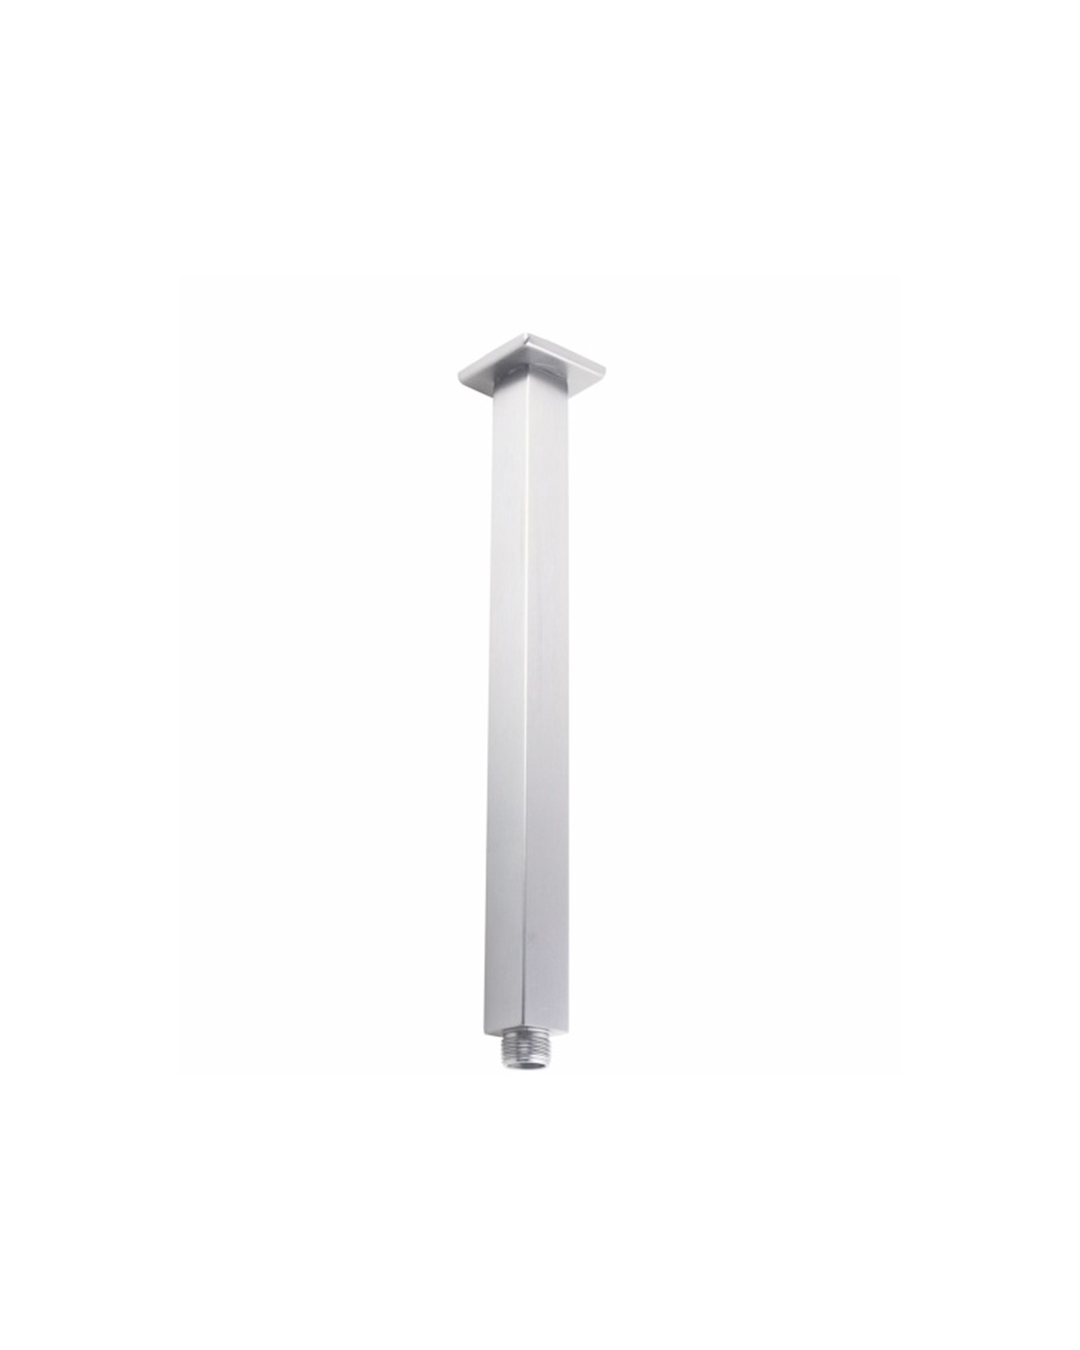 Square Ceiling Shower Arm 400mm